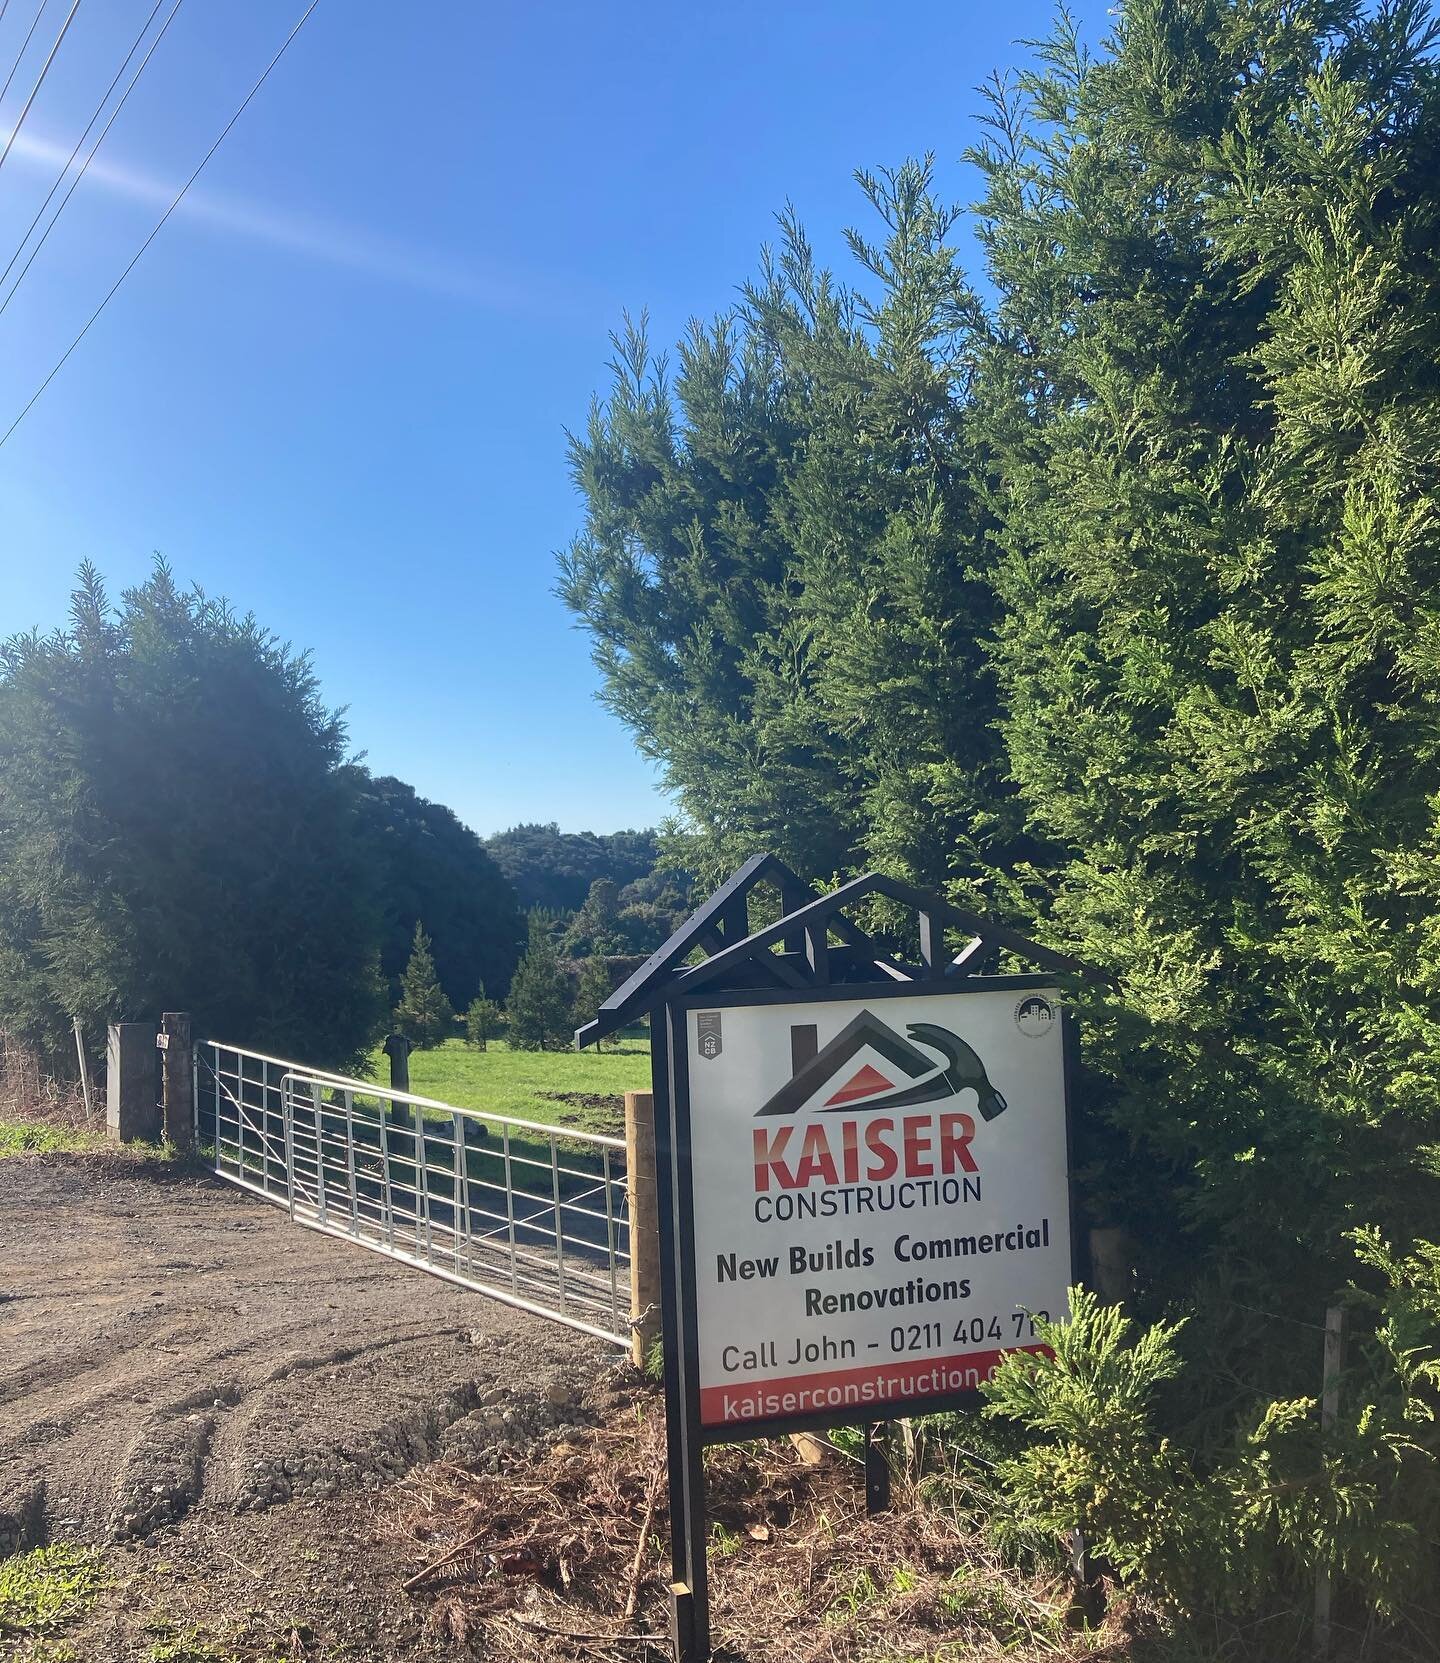 The sun is shining and we&rsquo;re breaking ground on an exciting project just out of town! 

#buildersofinsta #kaiserconstructionbuilding #newdaynewsite #buildingyourfuture